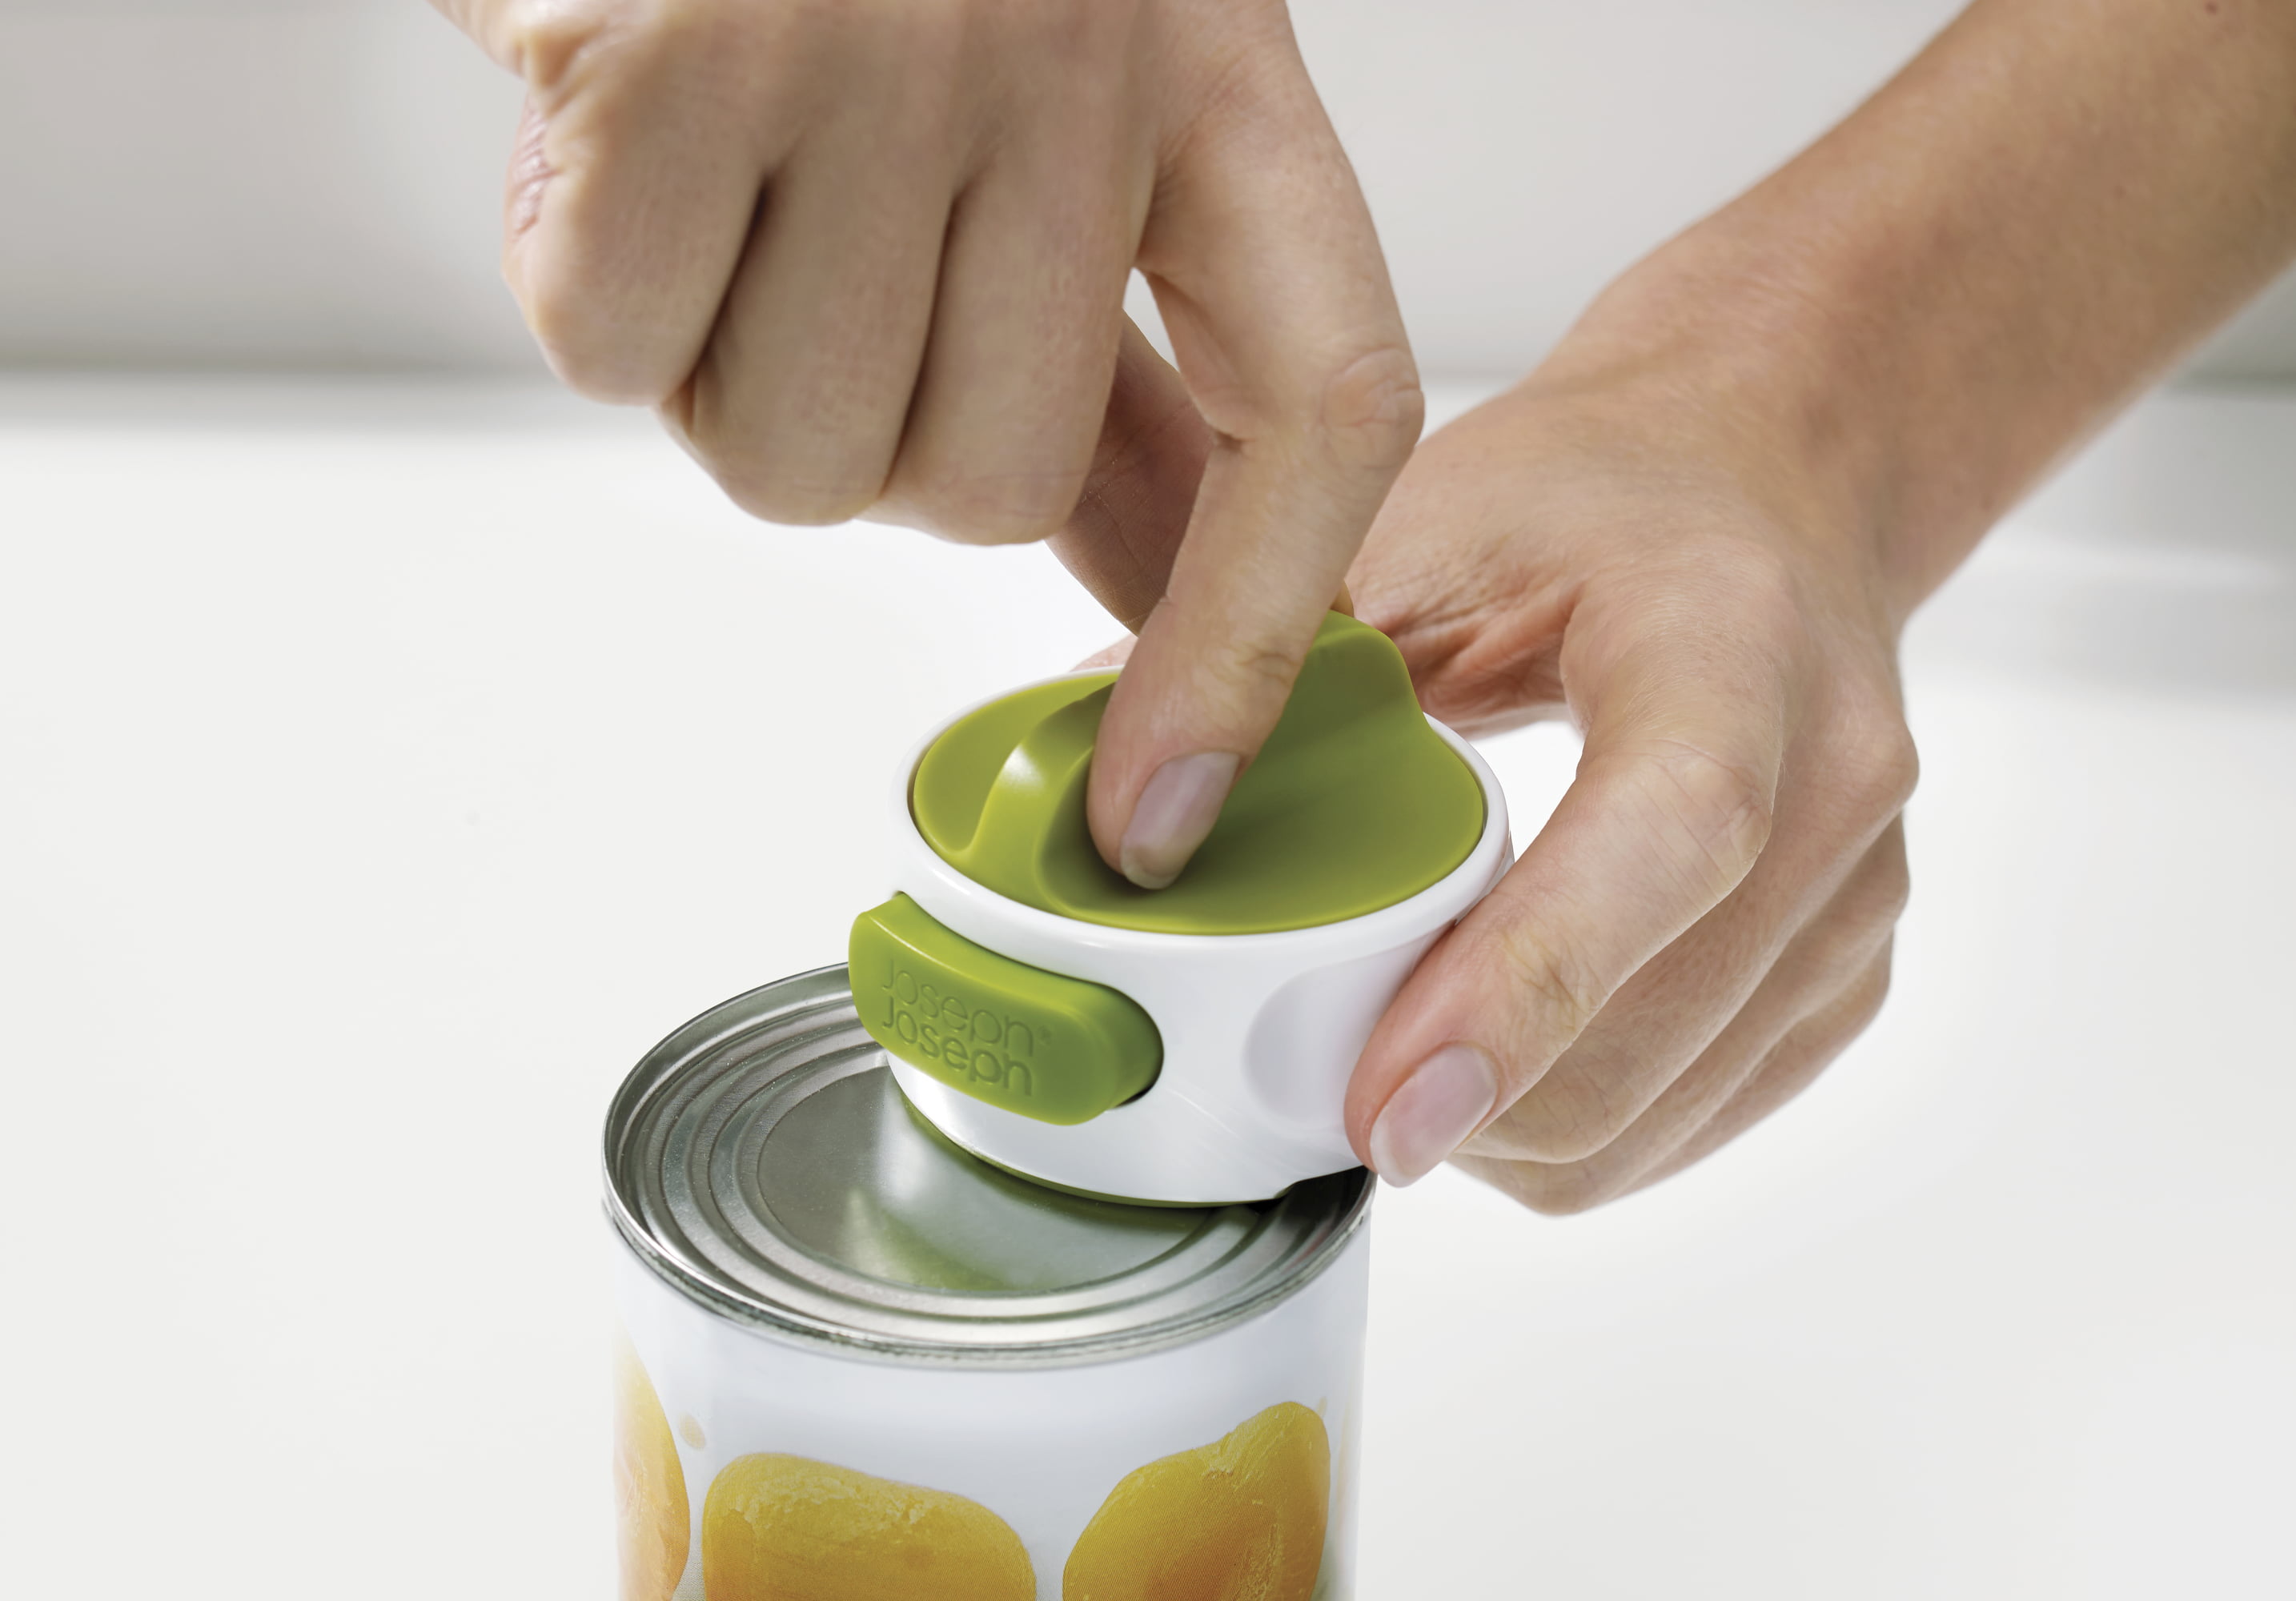 Double Handled Safety Can Opener – DR. SAVE